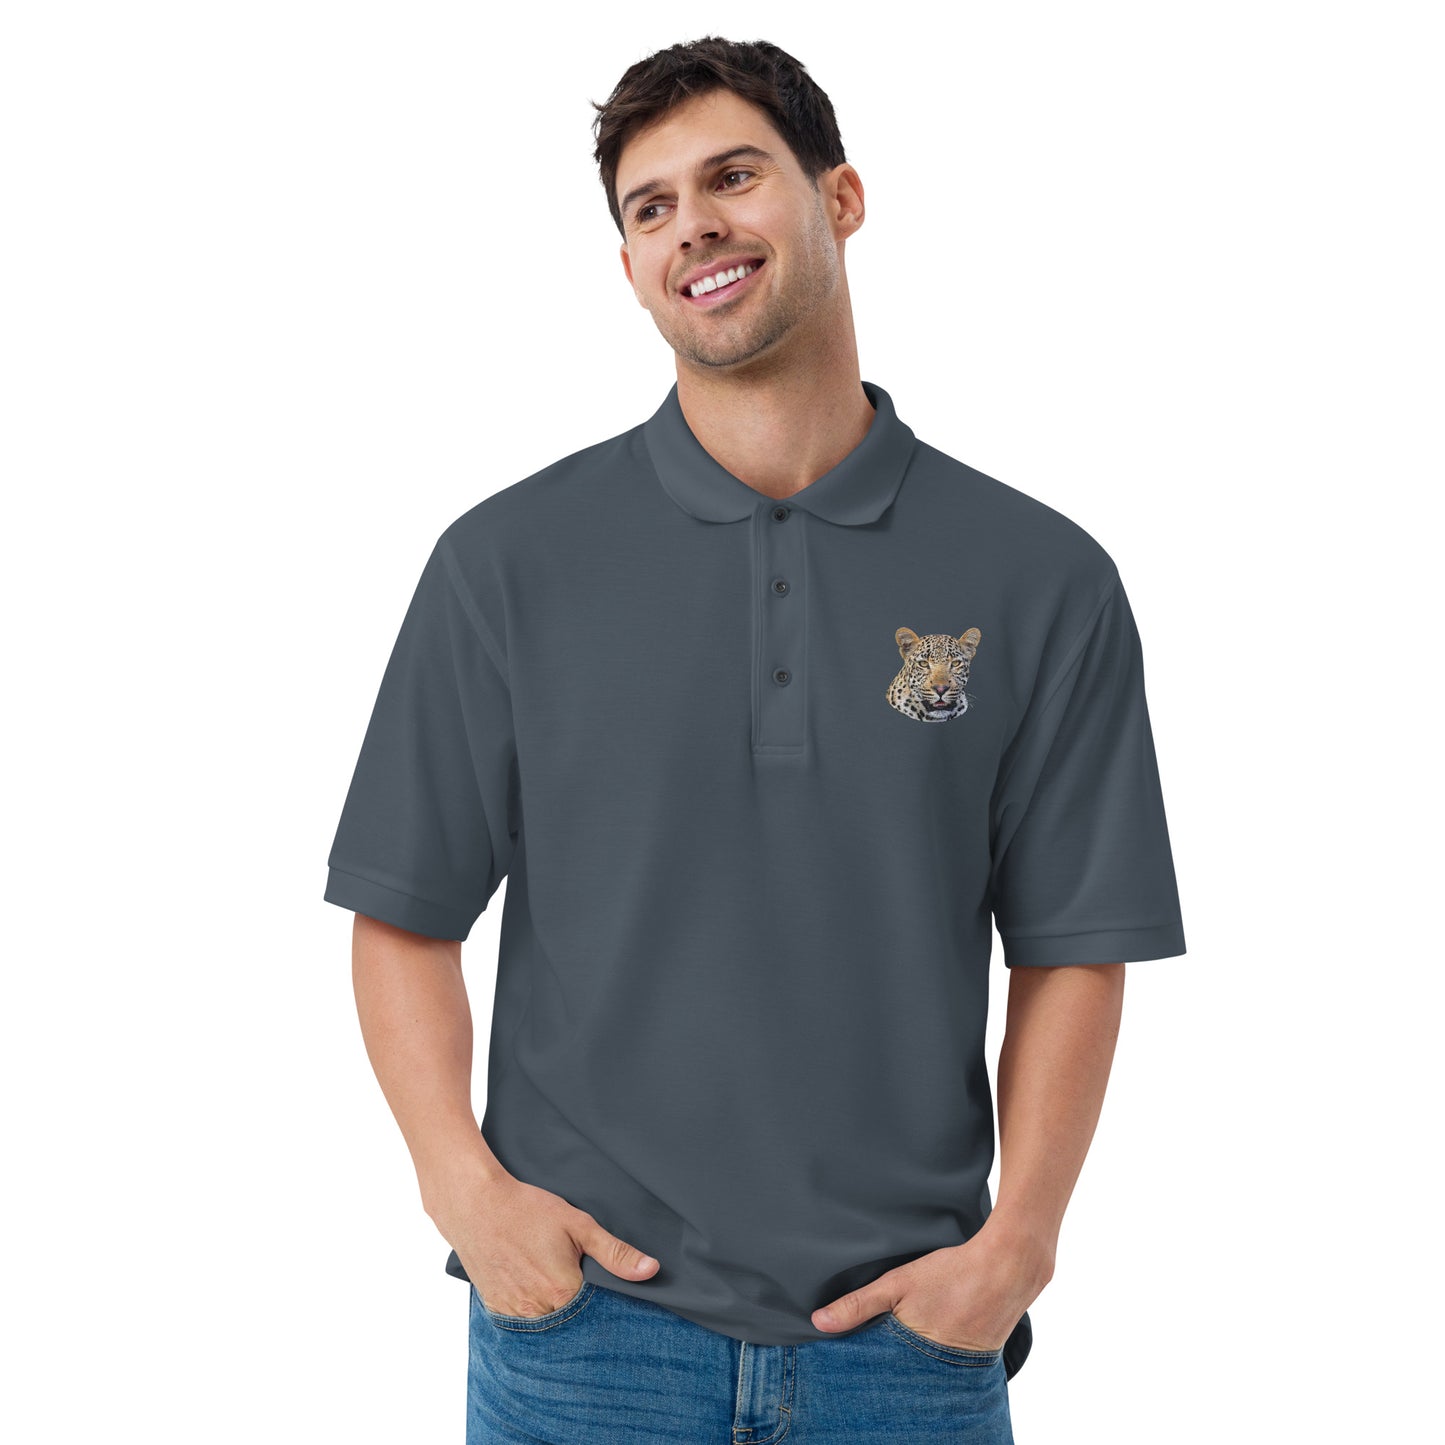 Polo Shirt with A Leopard Portrait Embroidered On The Shoulder.